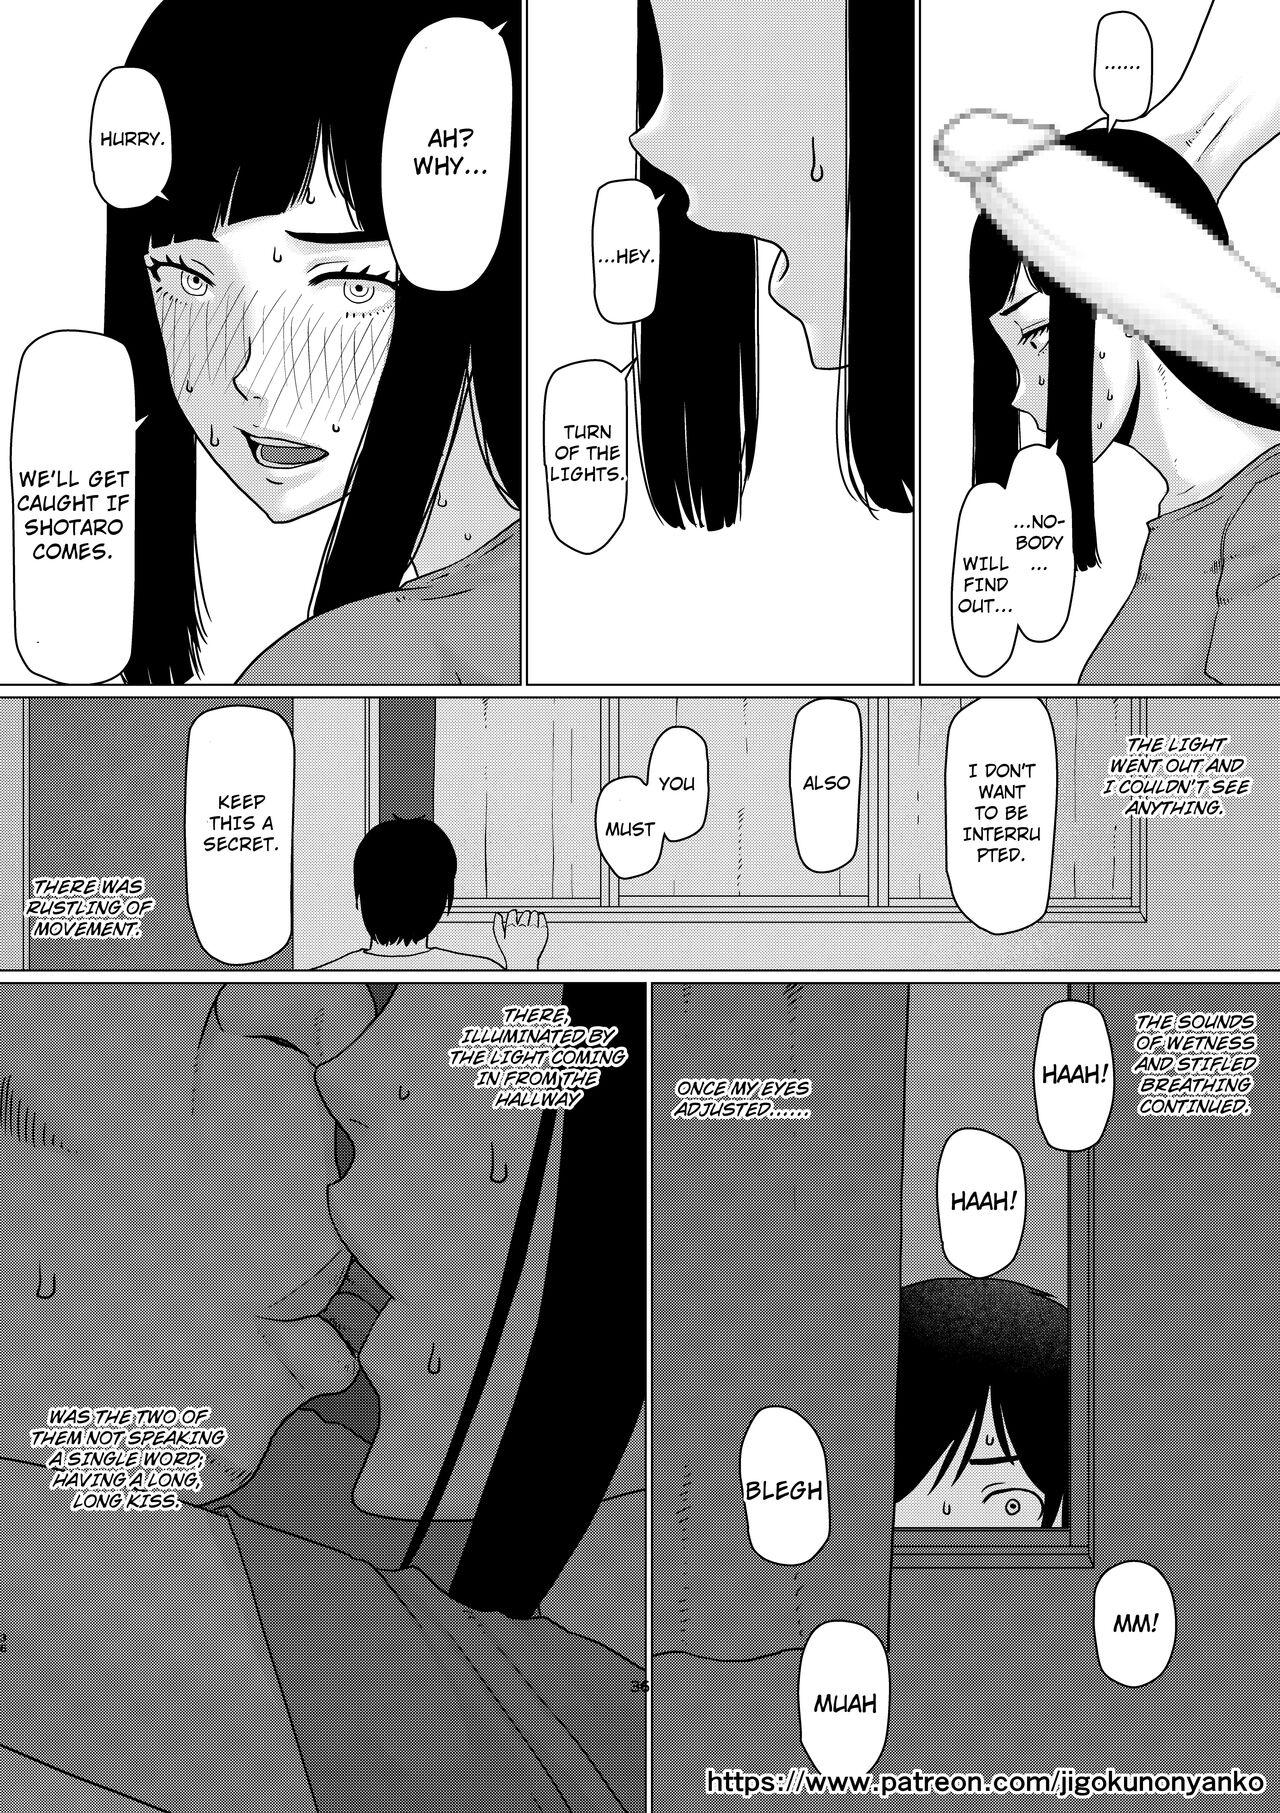 [Jigoku no Nyanko] Chieri-san Never Gives Up! 3 Part-1:Perverted toilet wife who fertilizes anyone's sperm with her husband's approval [Eng] 35